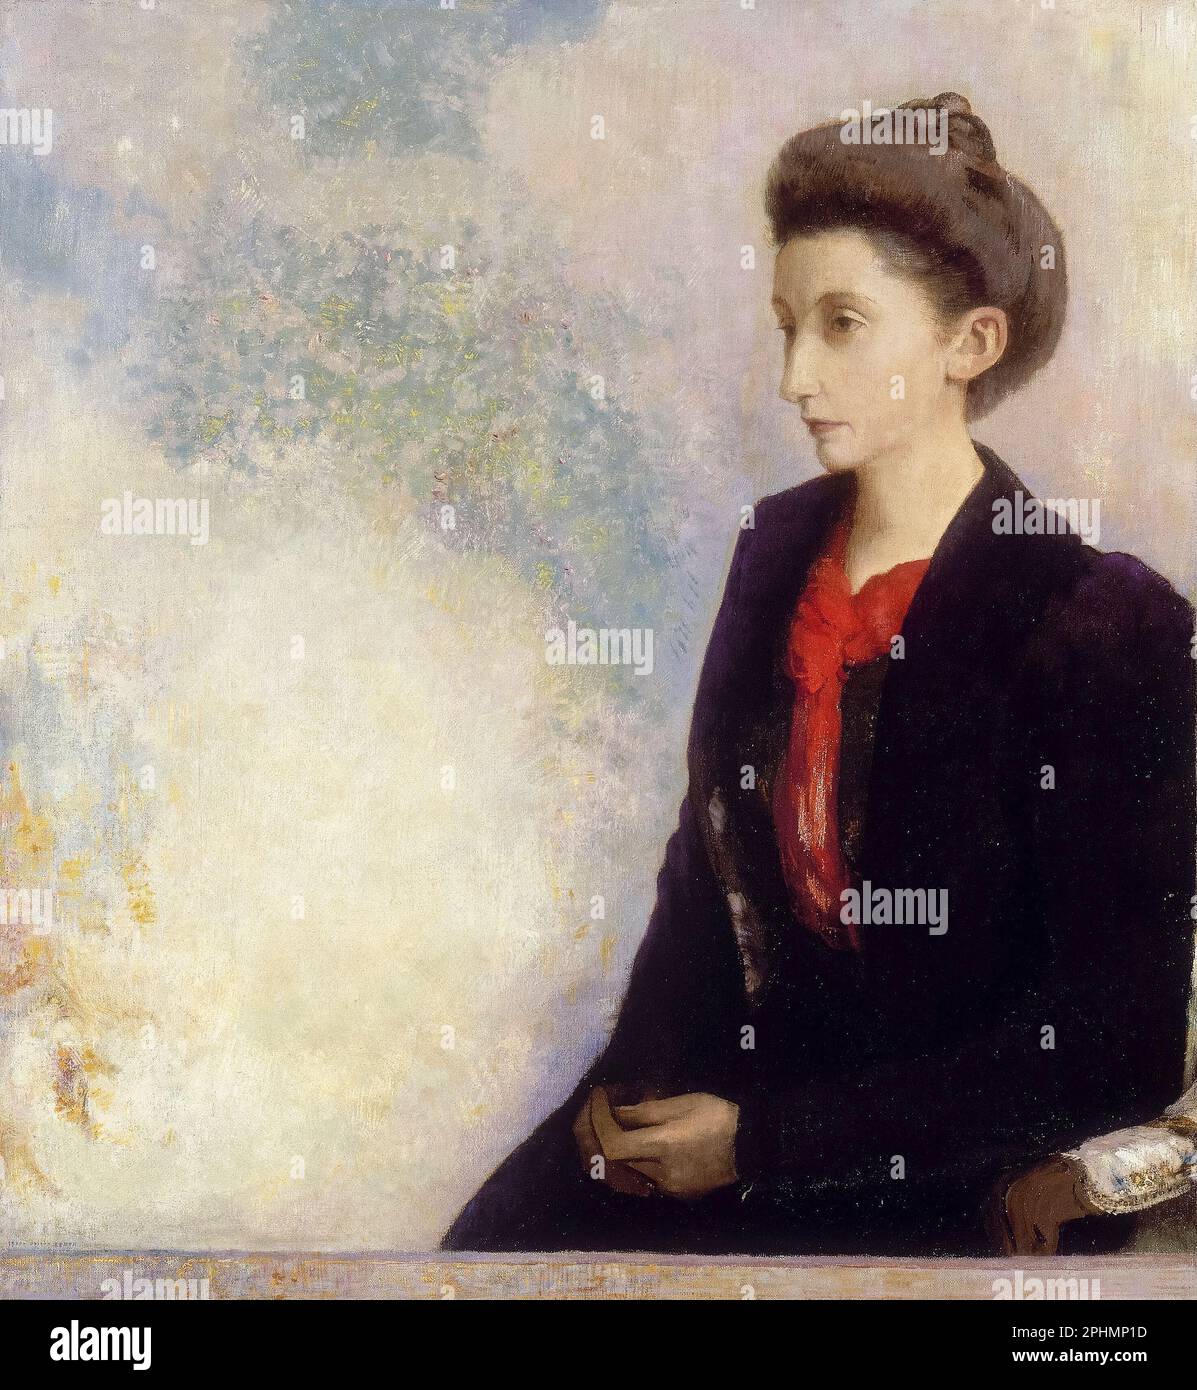 Baroness Robert de Domecy, portrait painting in oil on canvas by Odilon Redon, 1900 Stock Photo